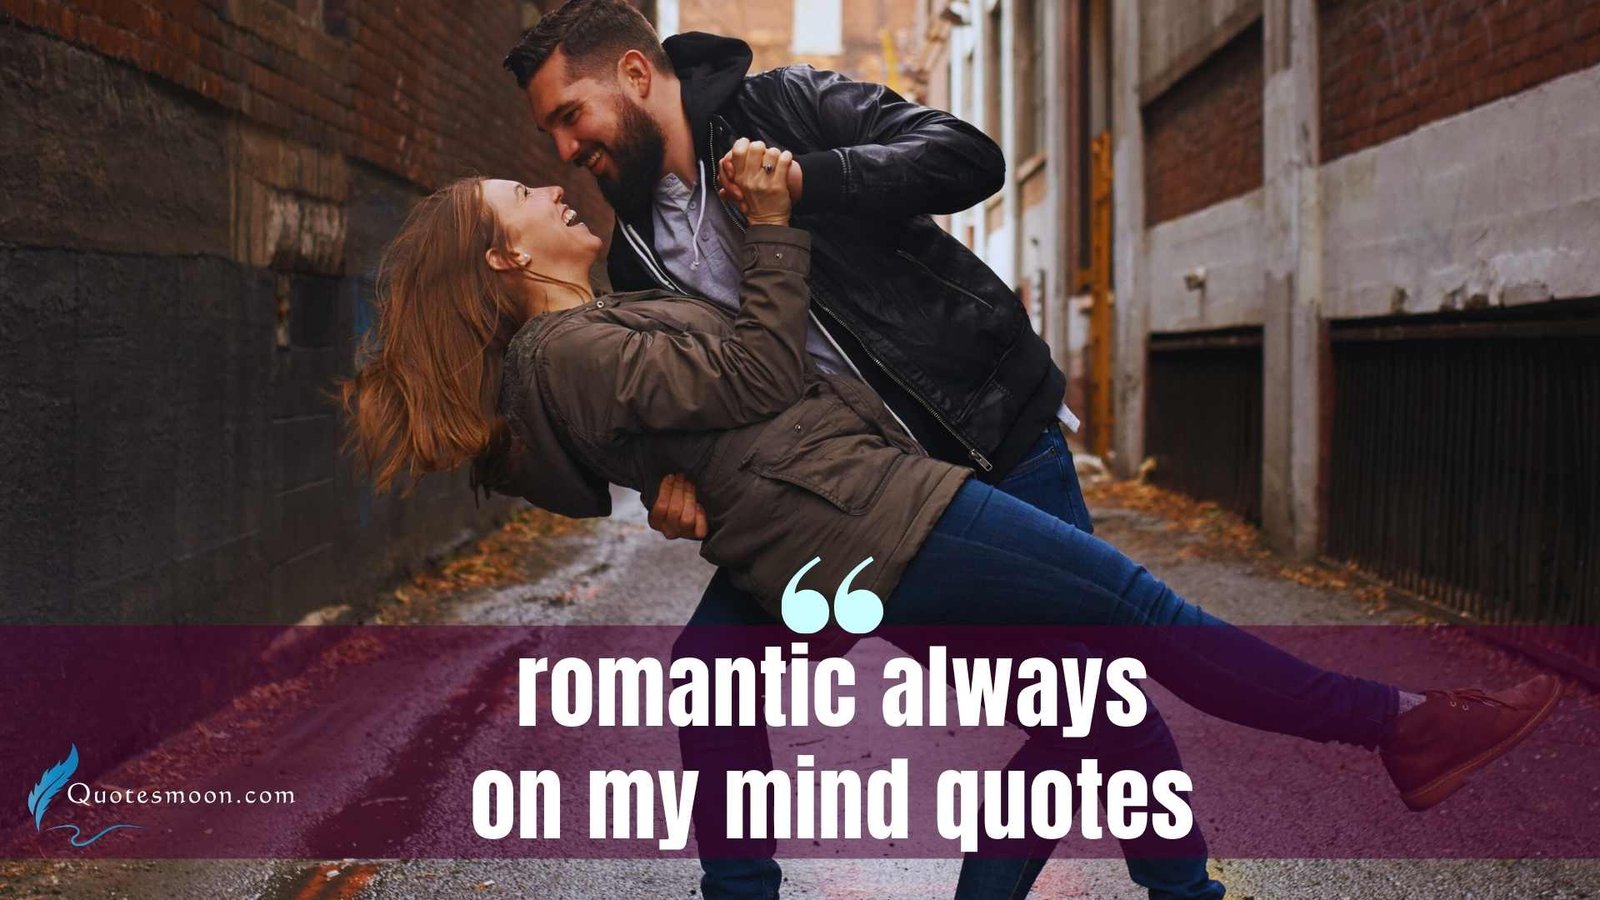 romantic always on my mind quotes images